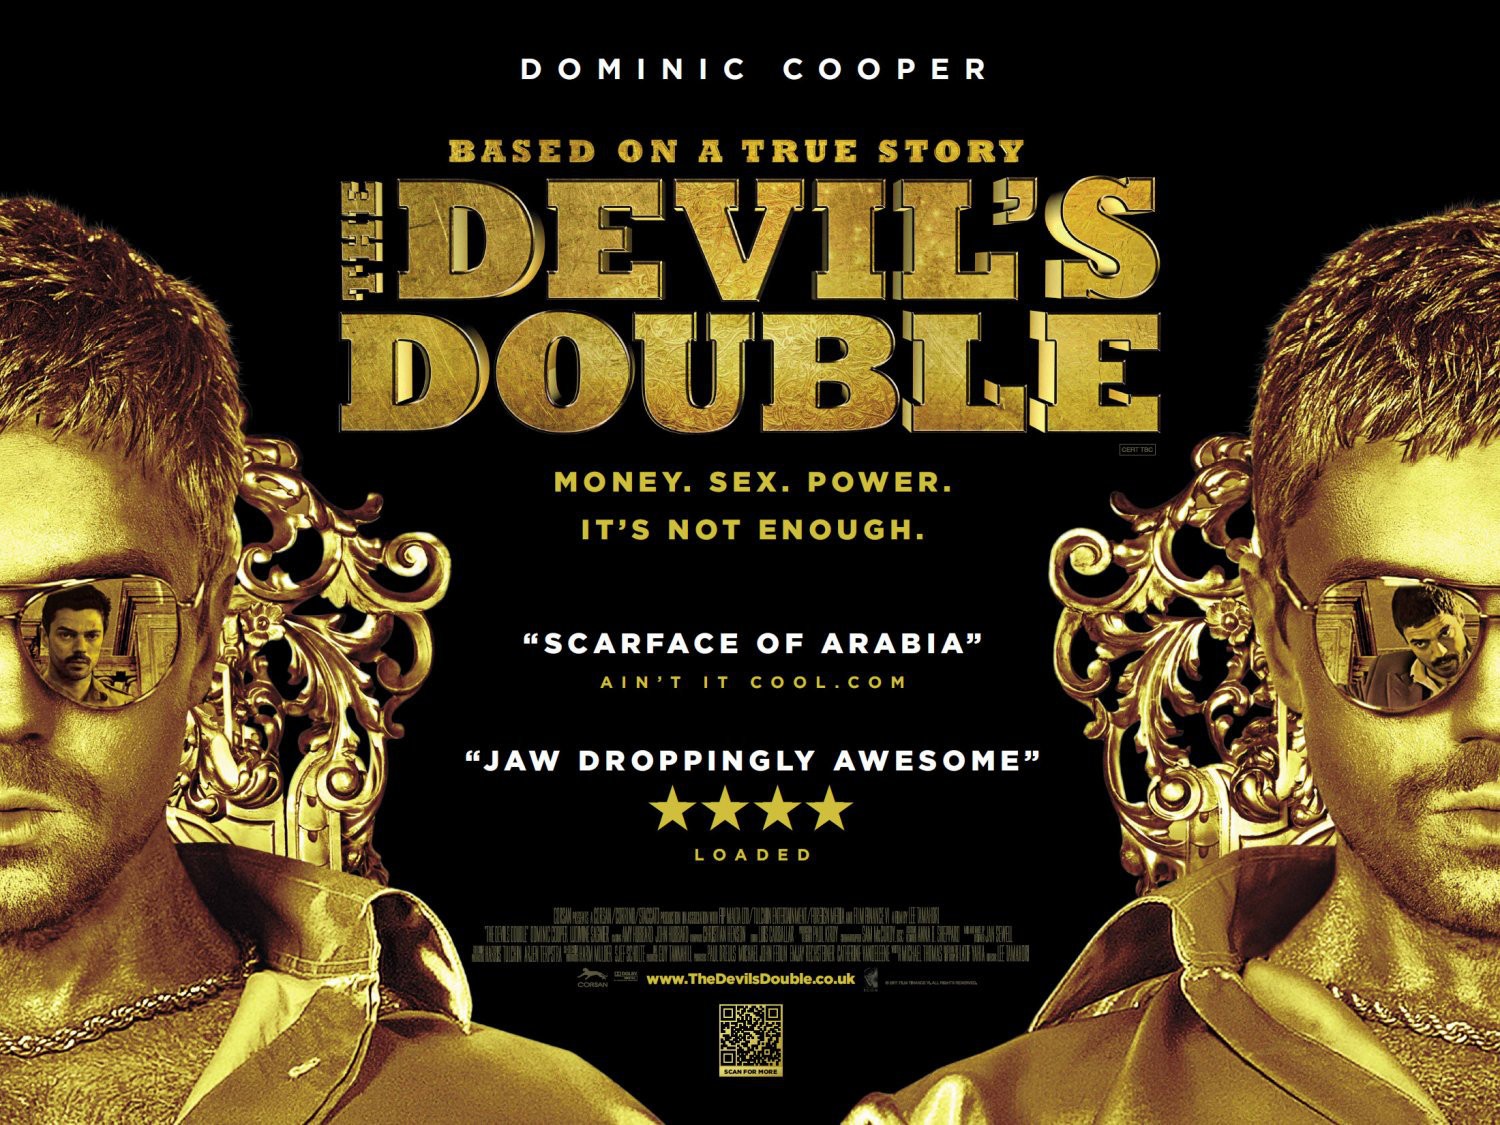 The Devils Double Dvd